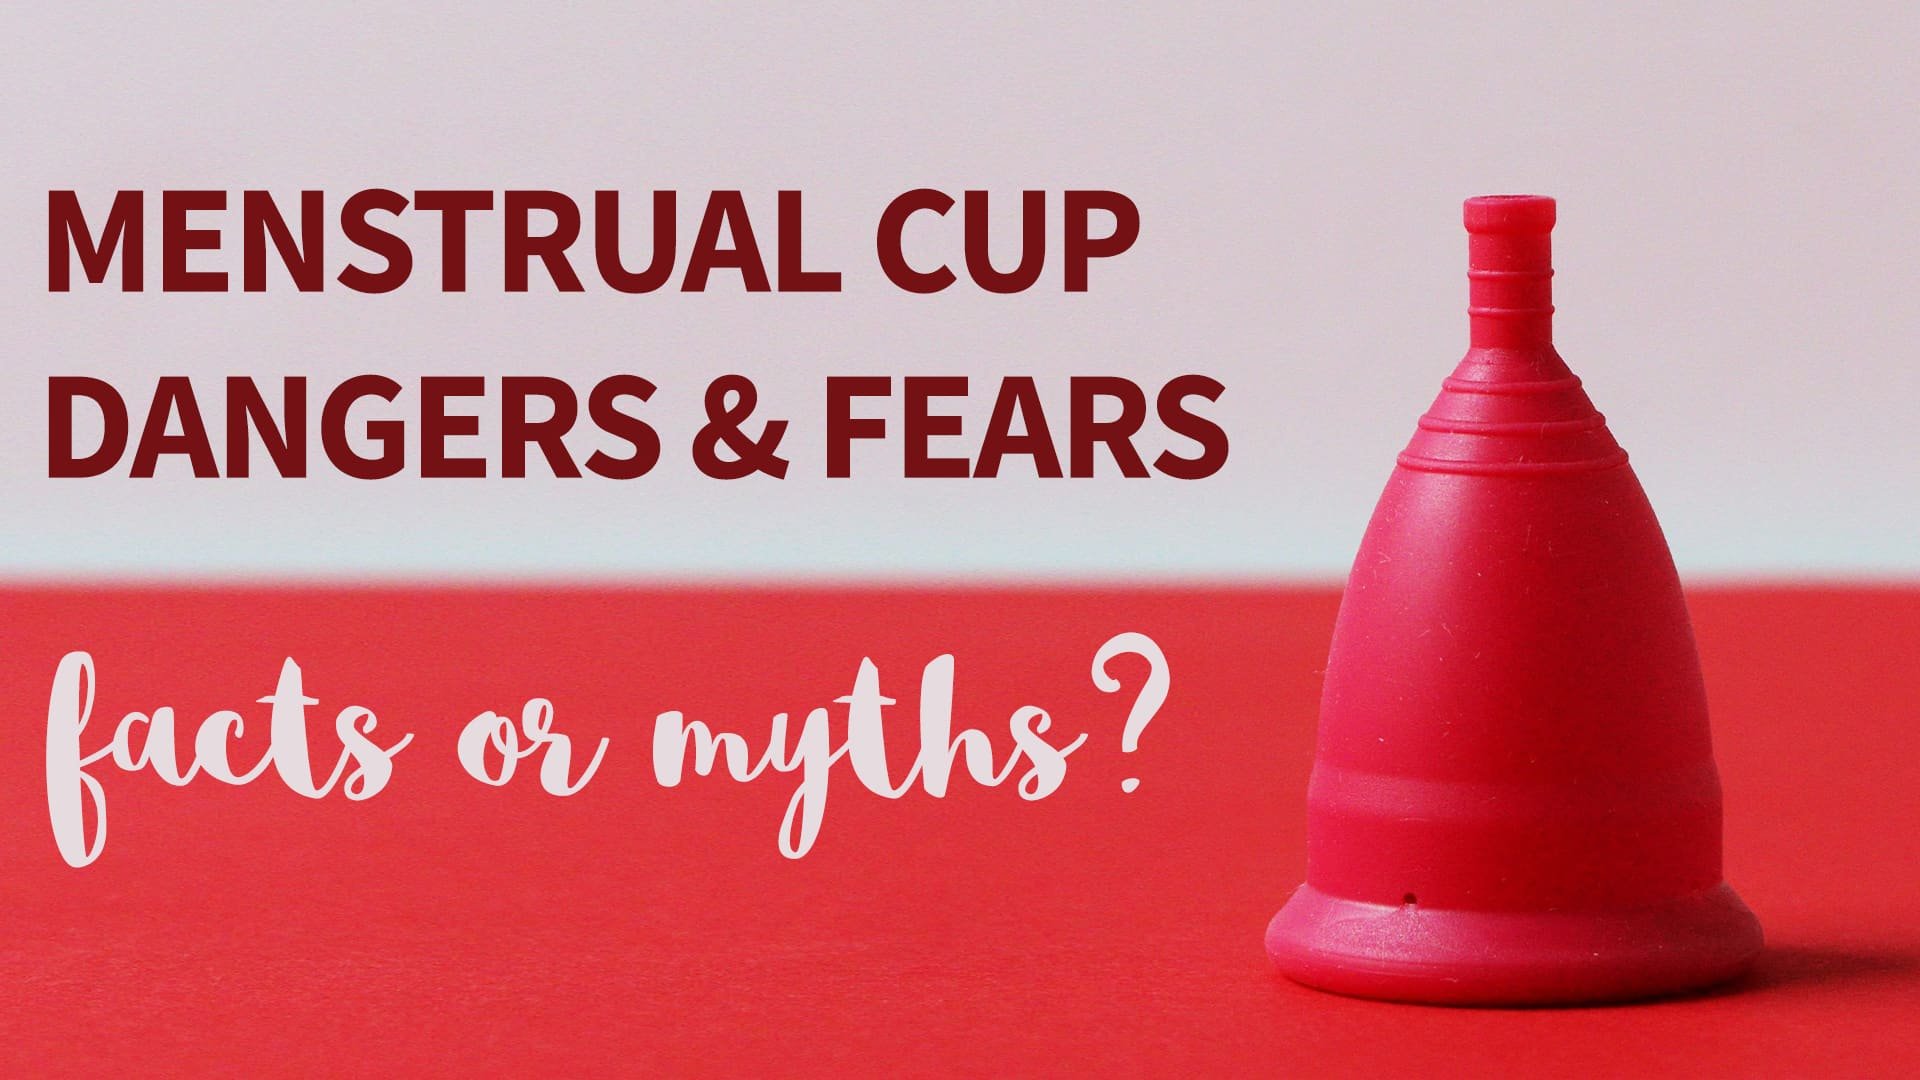 Menstrual cups: How to use, myths, and FAQs answered by a